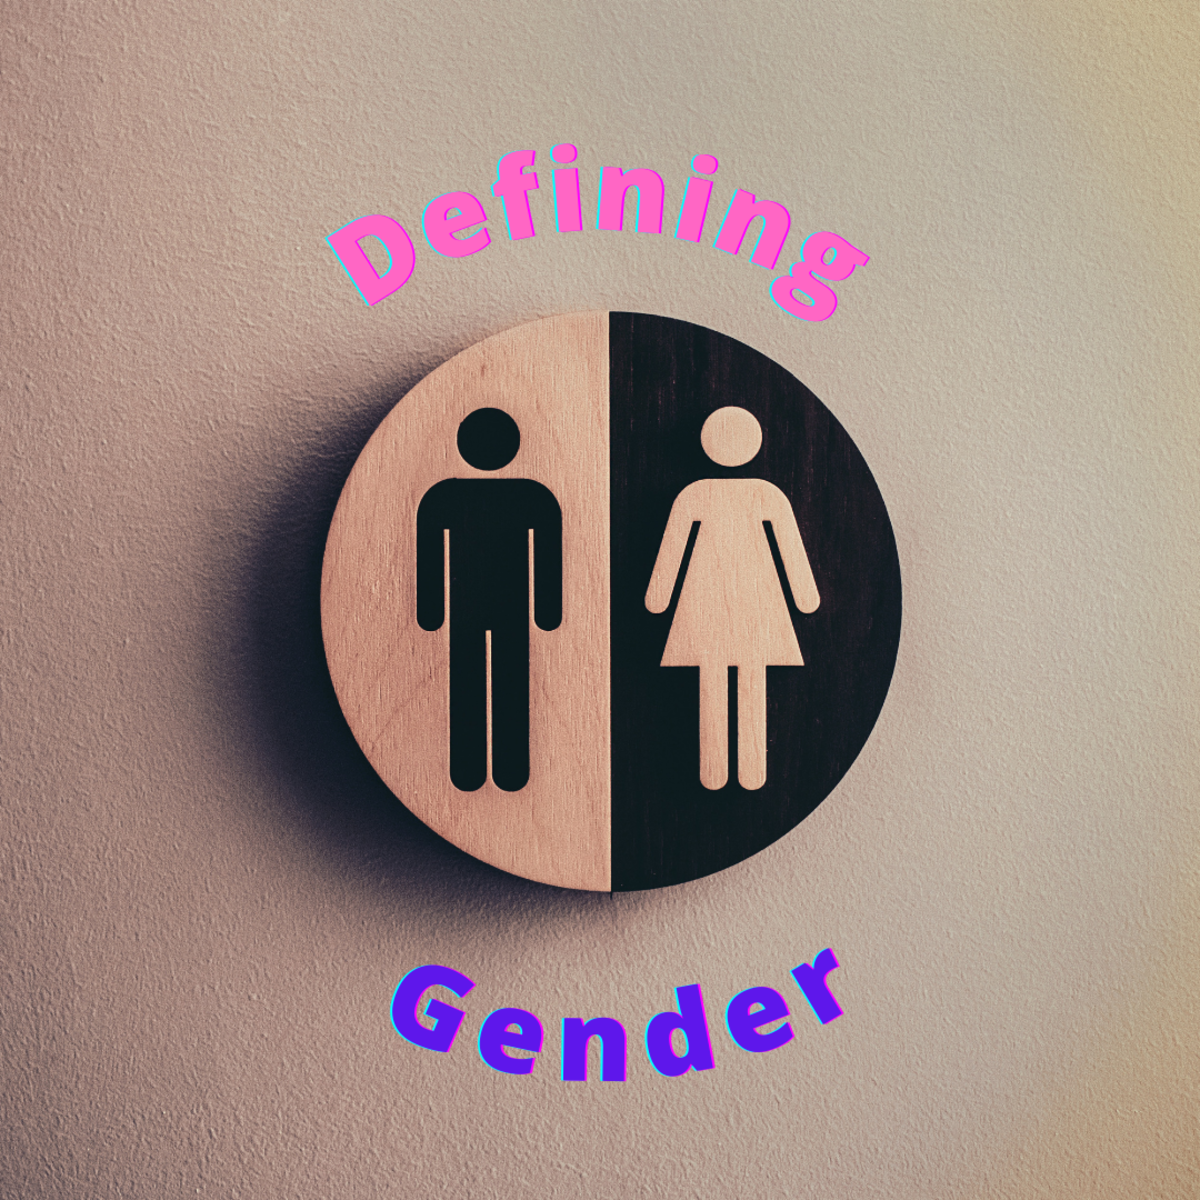 Gender is not the same as sex.